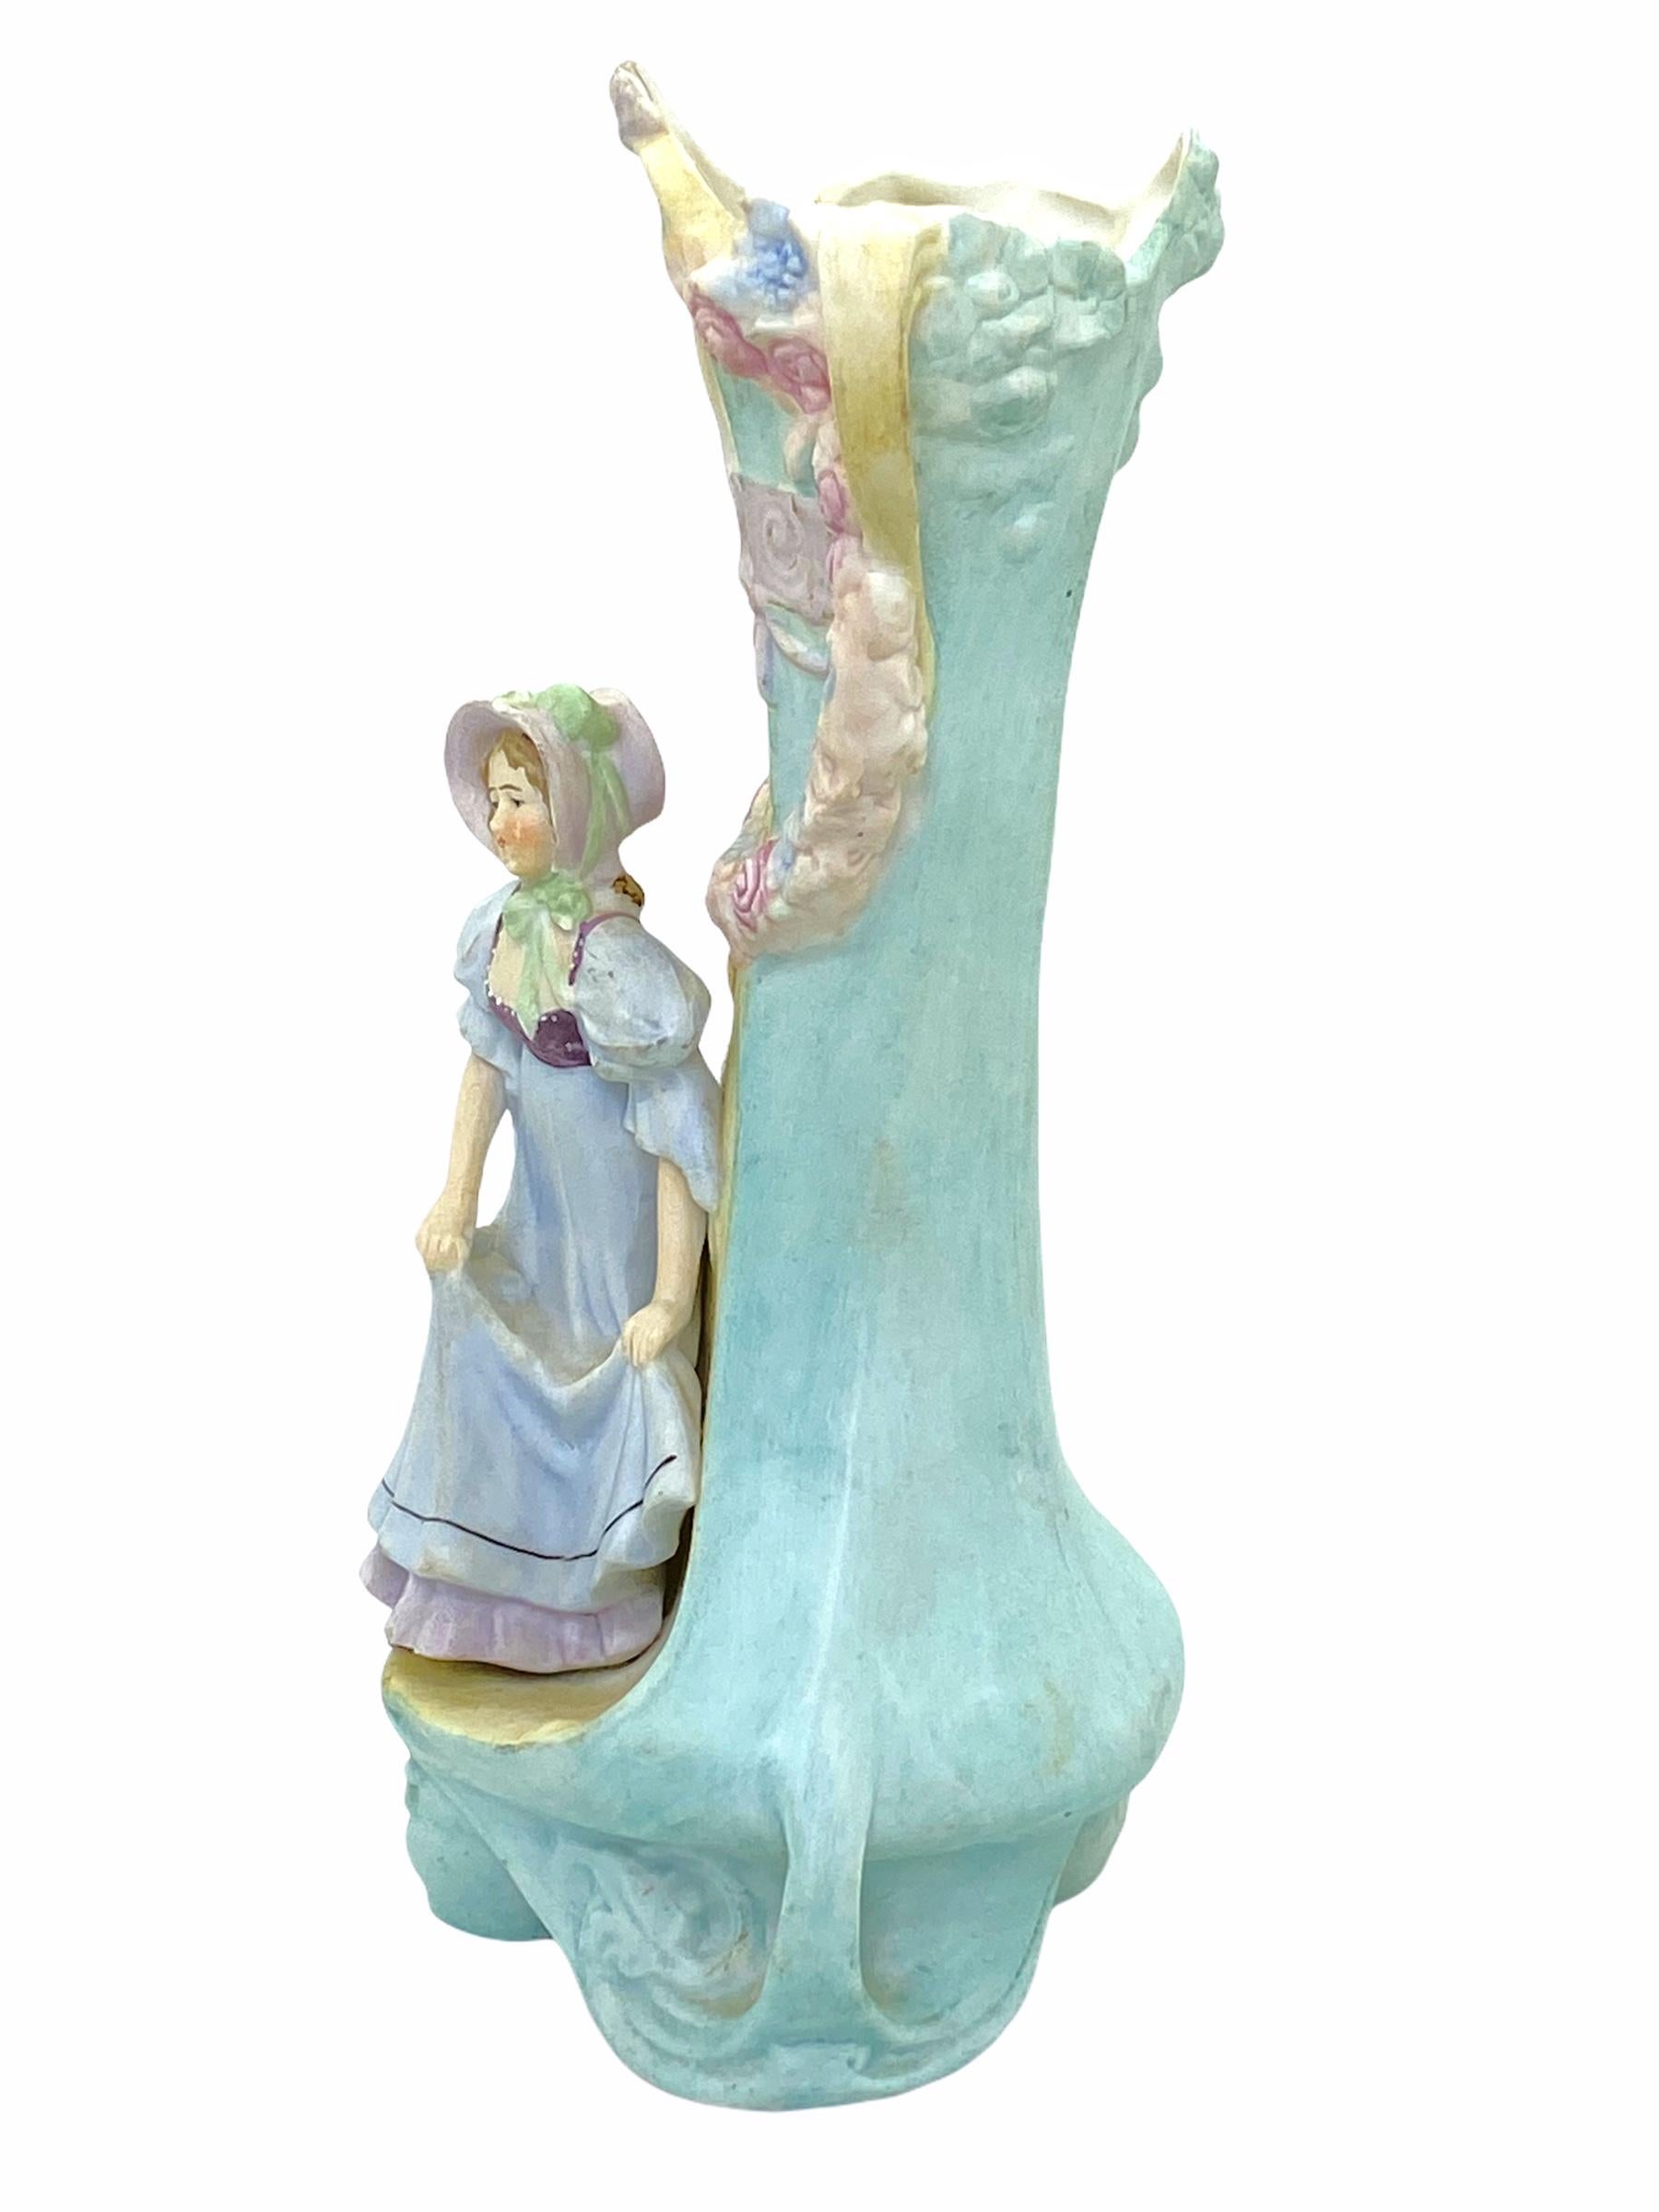 Beautiful flower vase handmade in Germany circa 1900s or older. A beautiful piece for any room. Handmade and hand painted in beautiful colors.